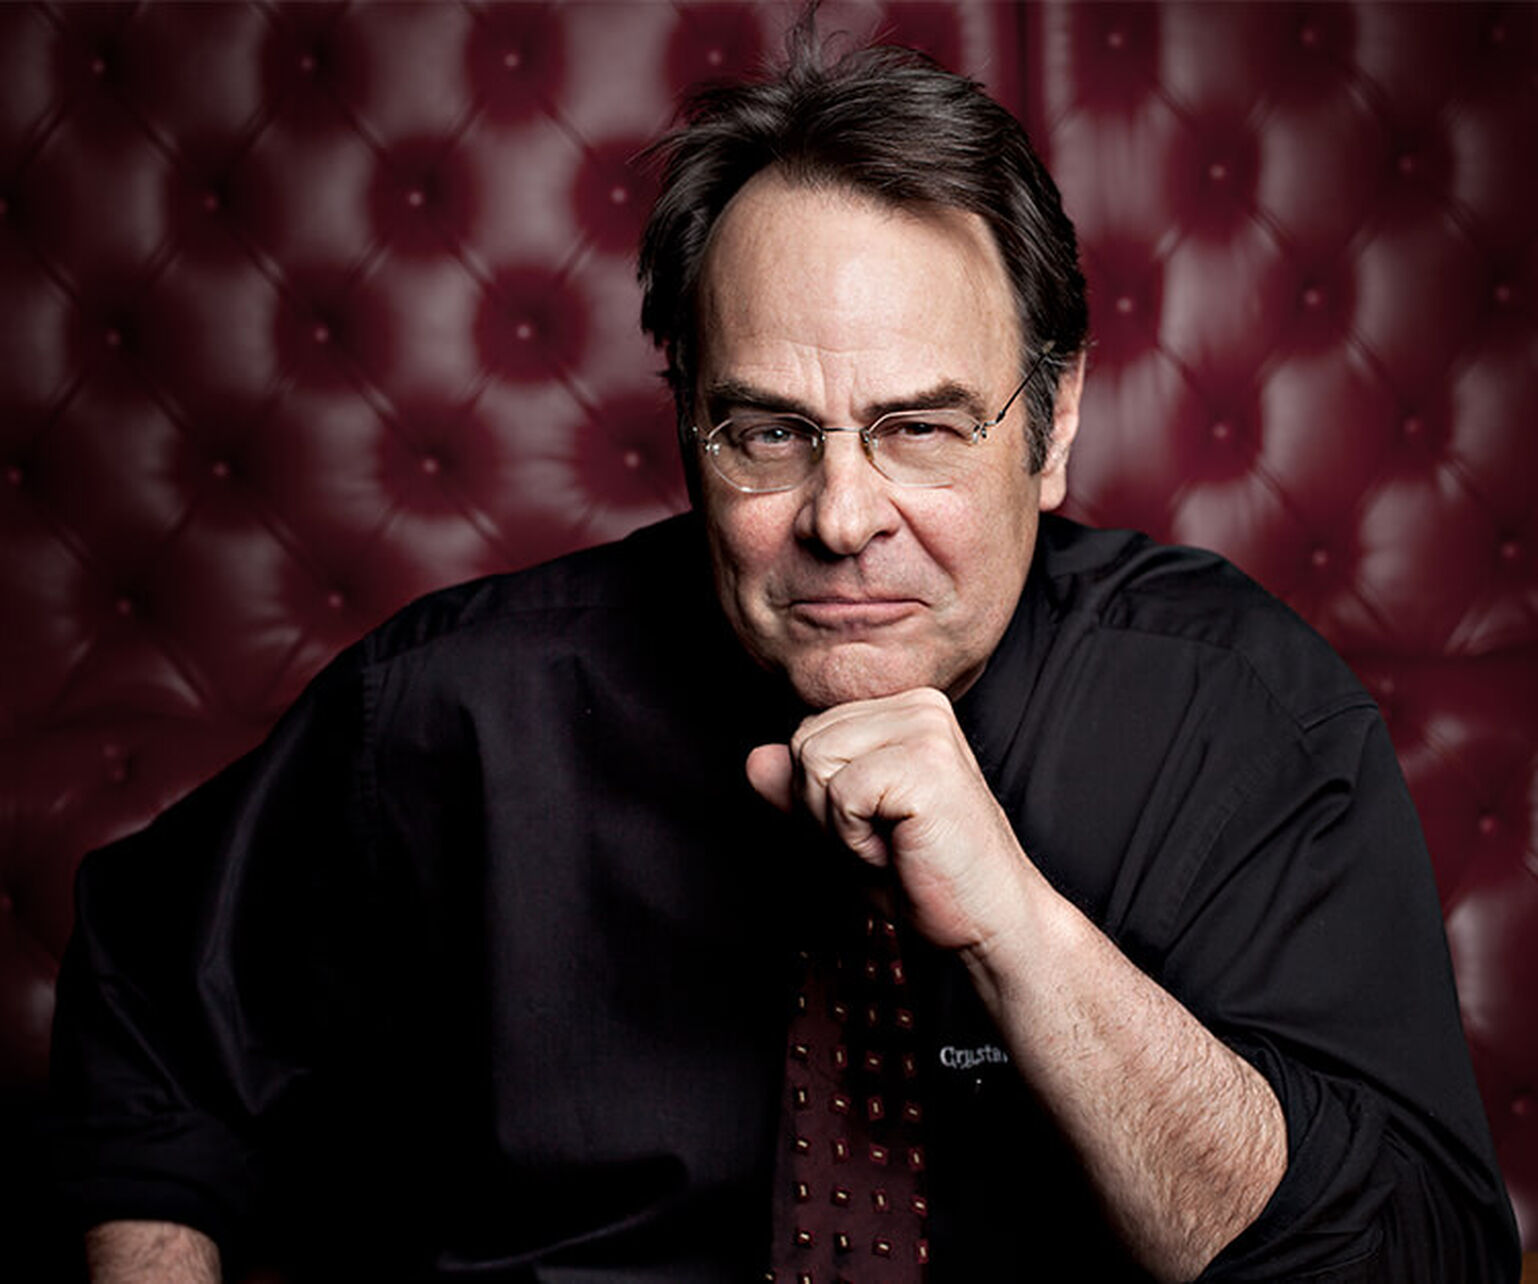 Dan Aykroyd poses for a headshot in a burgundy leather booth